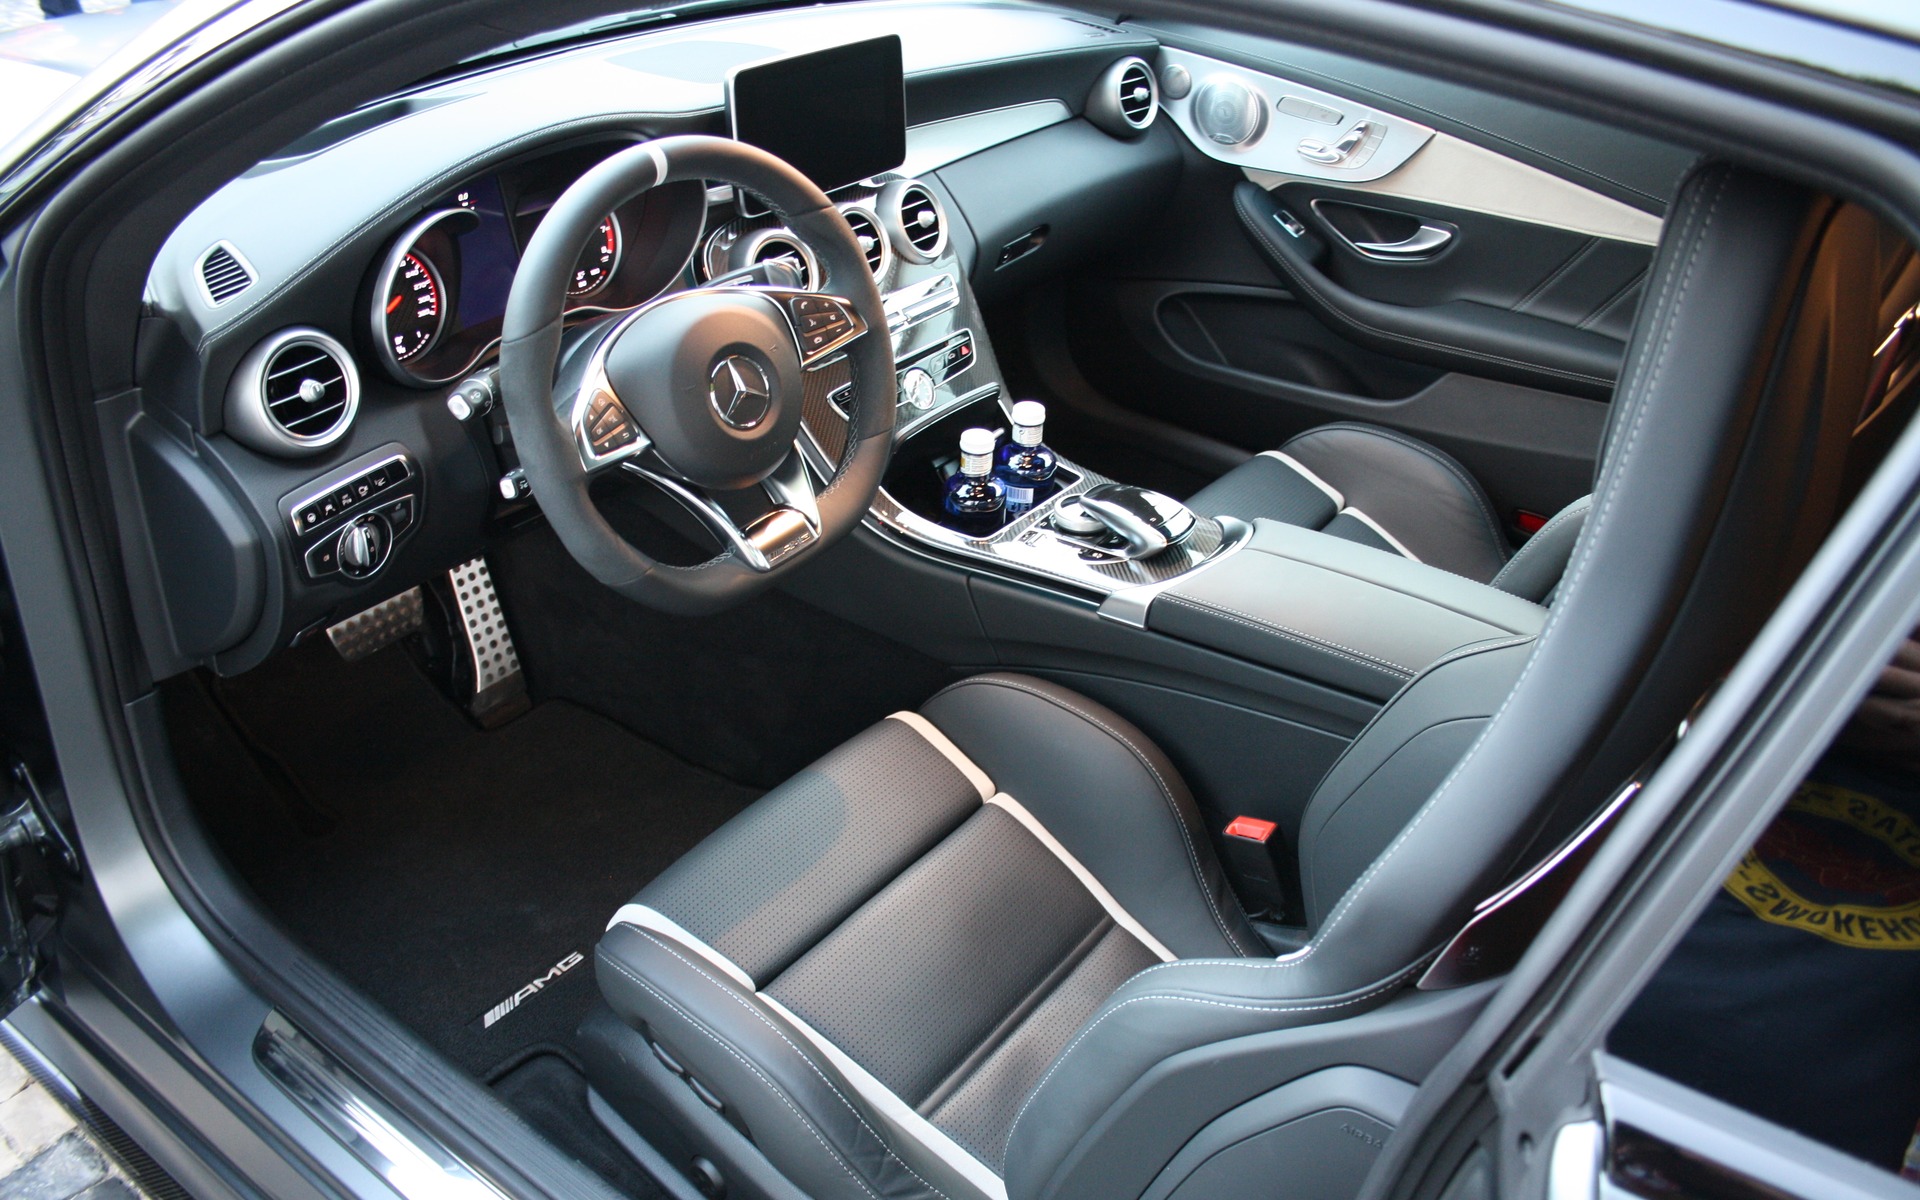 The C 63 boasts a beautifully crafted cockpit with bolstered sport seats.